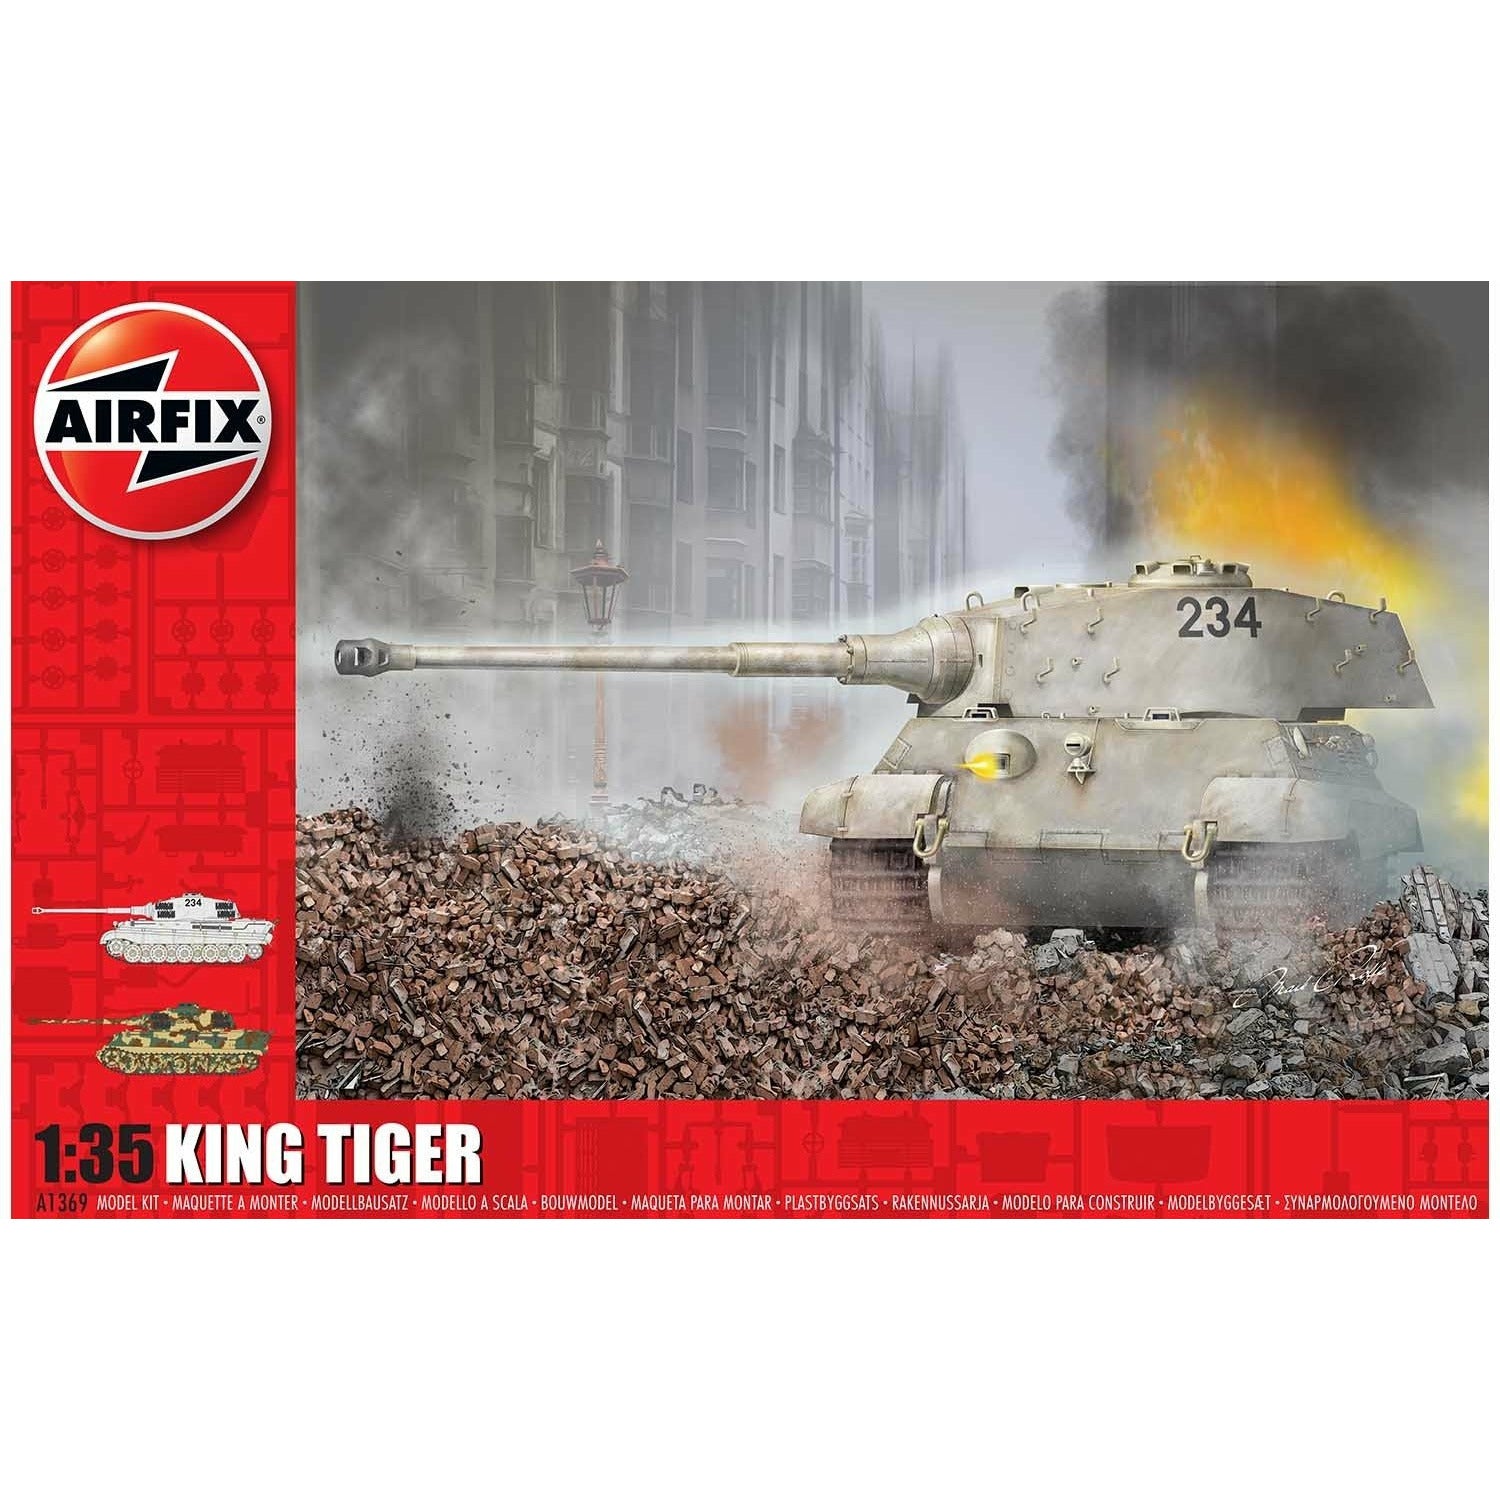 King Tiger 1/35 #A1369 by Airfix